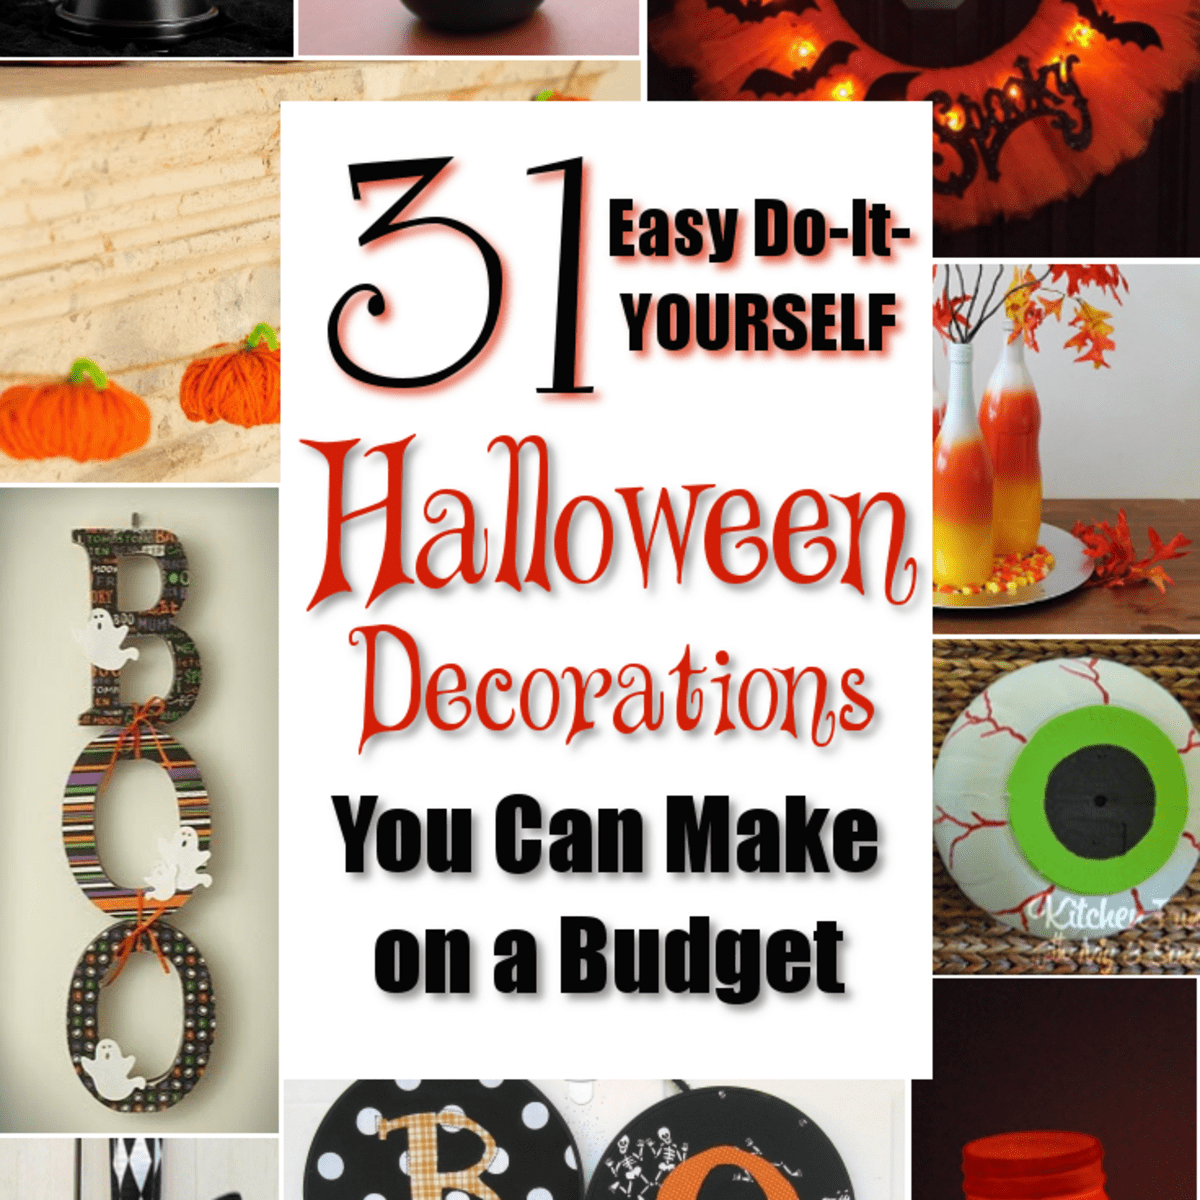 31 Quick and Clever Centerpieces to Help You Win Halloween